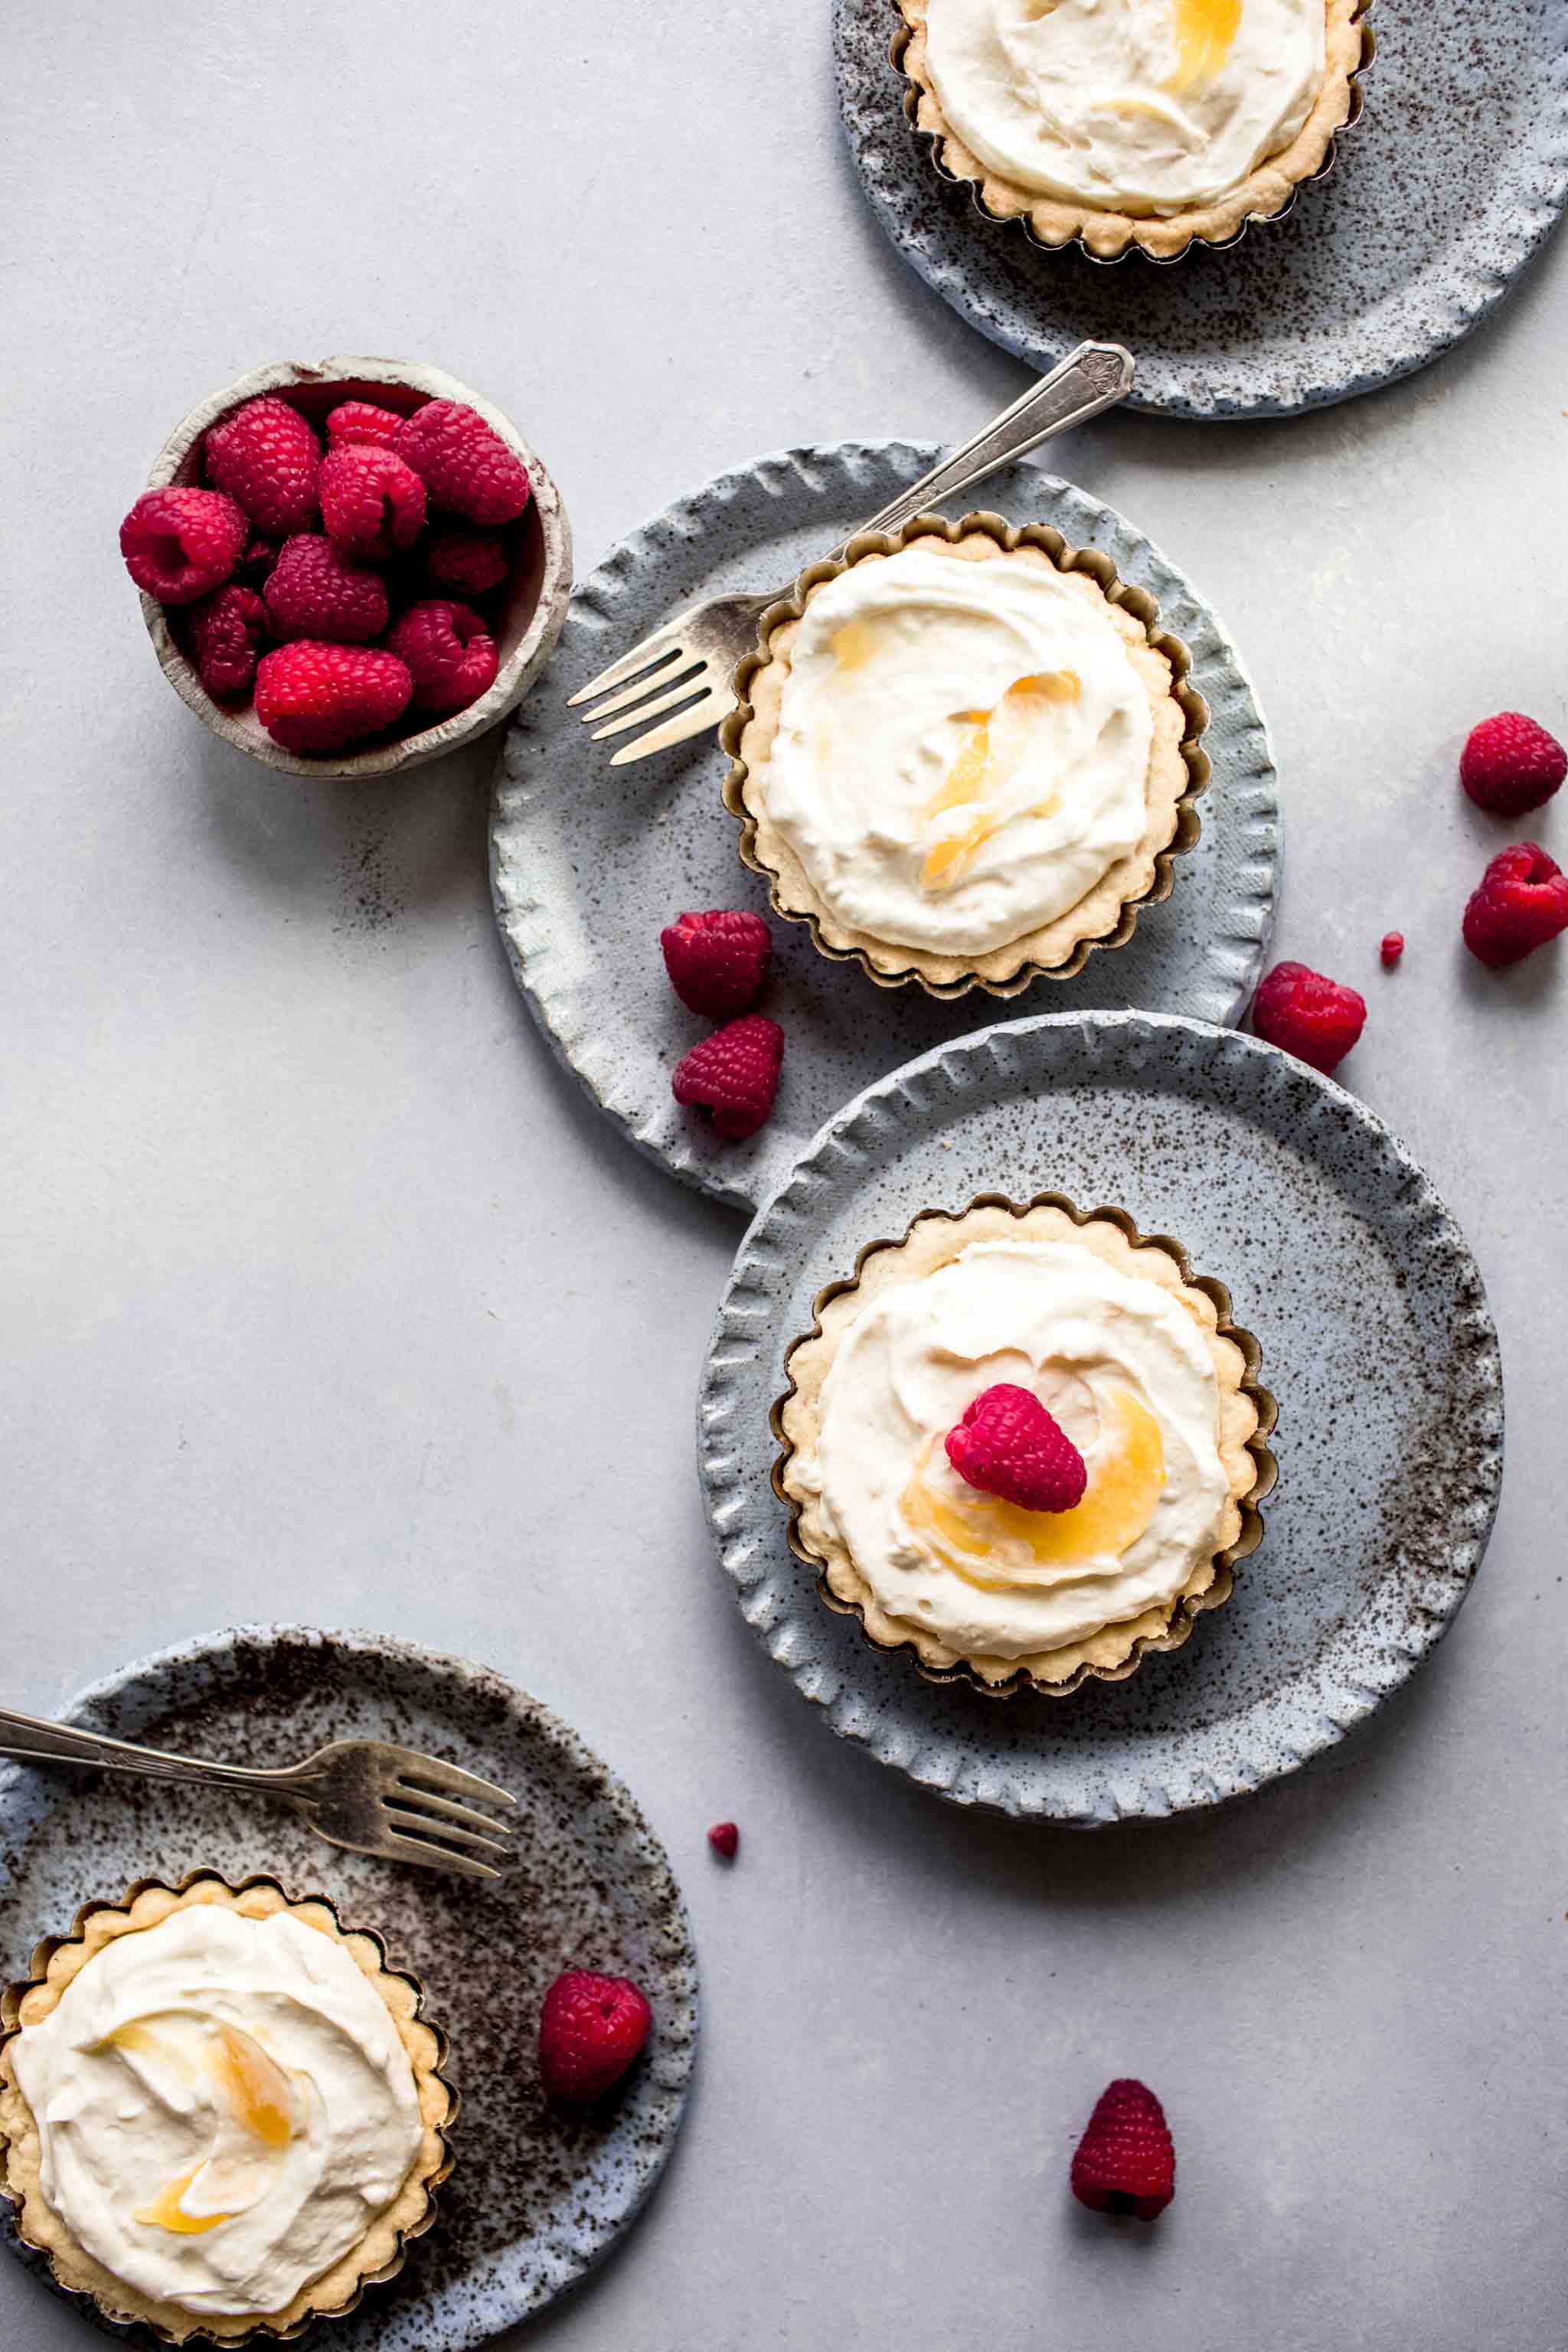 These Lemon Tartlets are the most delicious dessert. A delicate buttery crust is topped with a lemon curd-cream cheese blend that tastes like cheesecake. Top them off with raspberries to make them even more pretty and delicious!